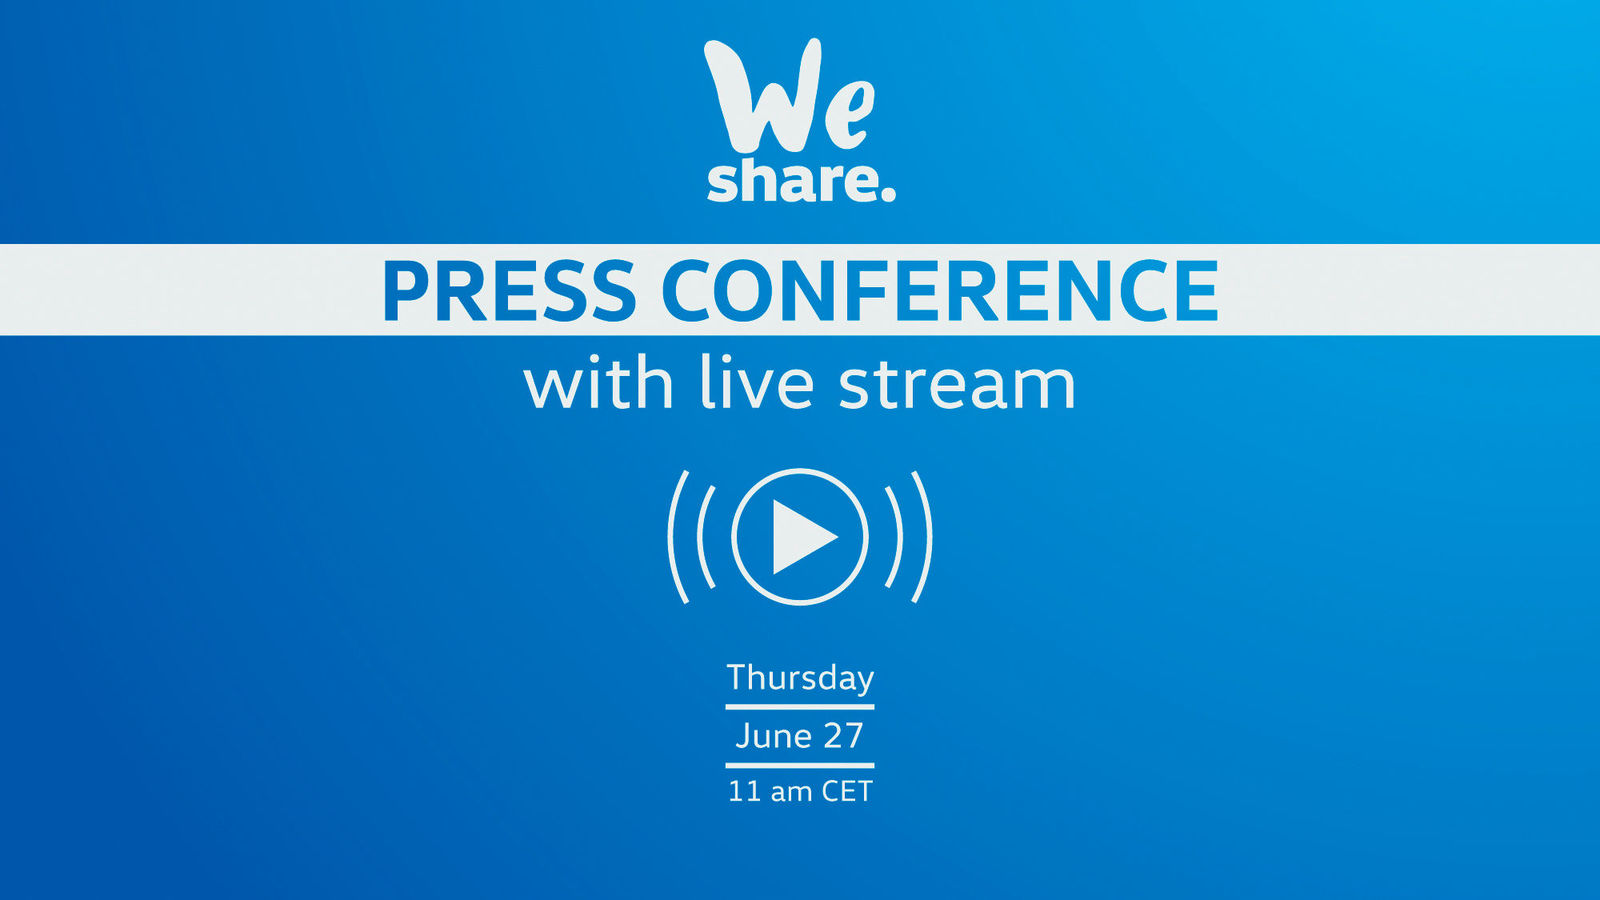 Press conference WeShare